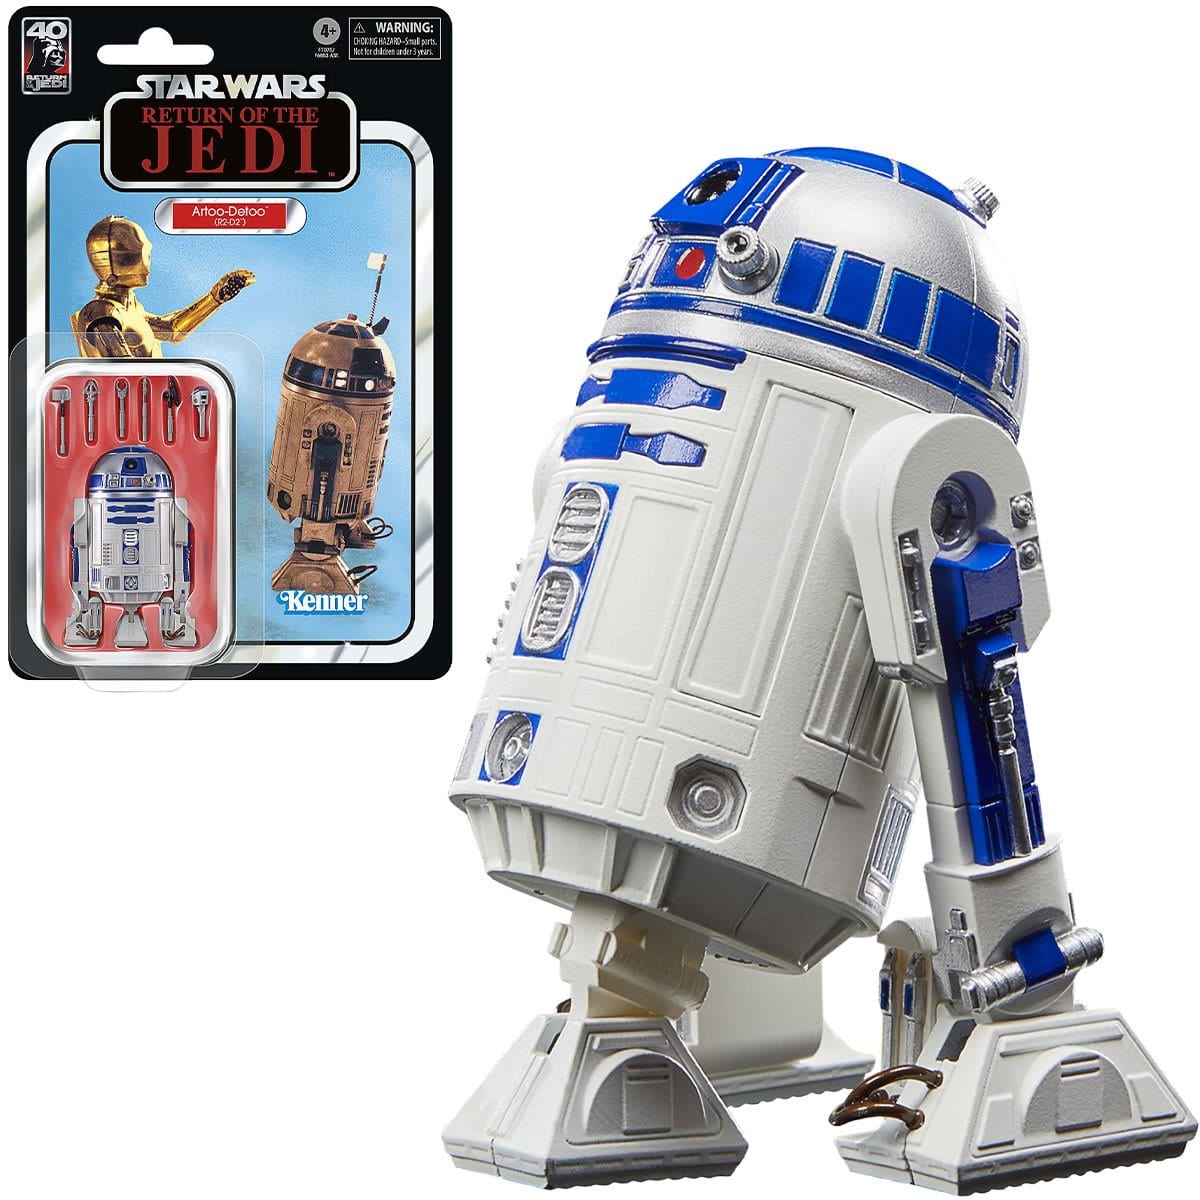 Star Wars The Black Series Return of the Jedi 40th Anniversary 6-Inch R2-D2 (Artoo-Deetoo) Action Figure With Display Art